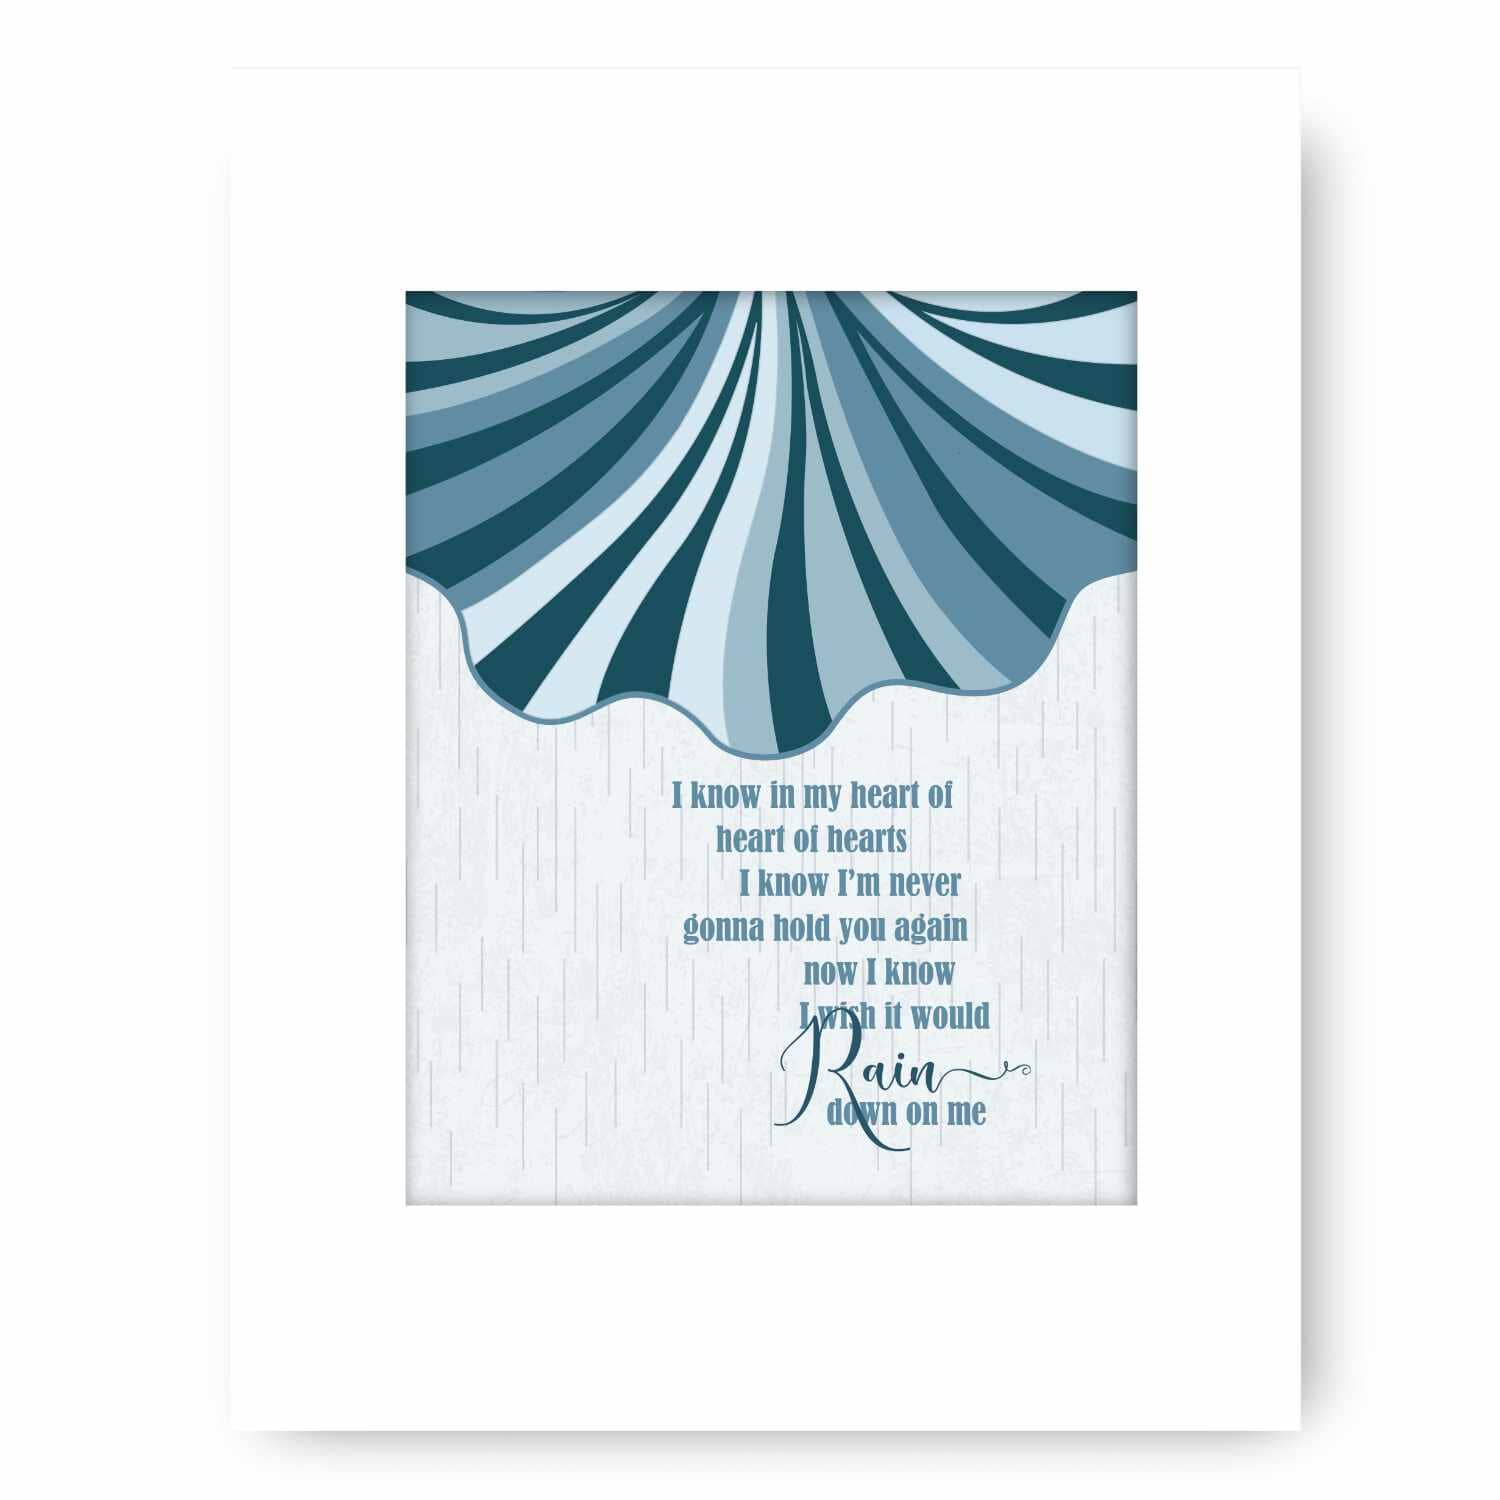 I Wish it Would Rain Down by Phil Collins - Song Lyric Poster Song Lyrics Art Song Lyrics Art 8x10 White Matted Print 